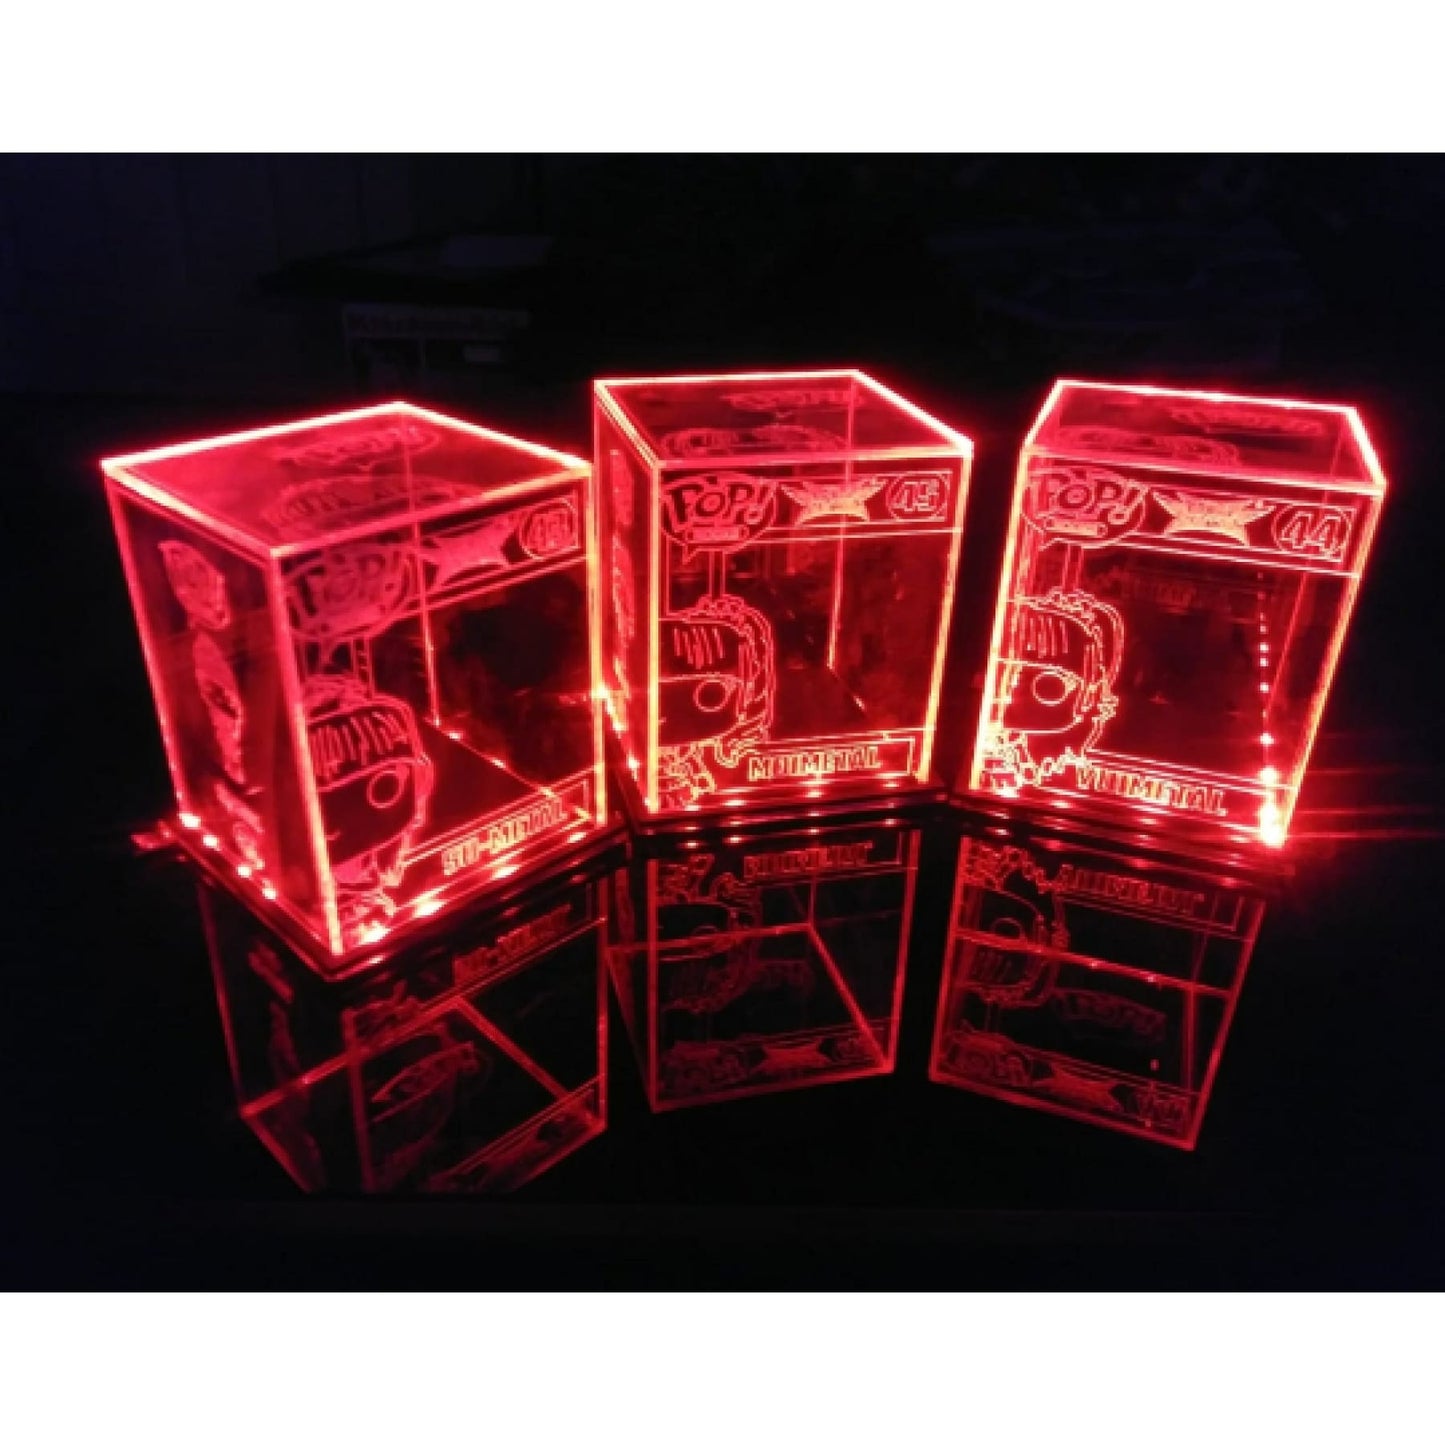 Acrylic LED Case Lamp for Unboxed Funko Pop, 3 Sides Design, Custom Made